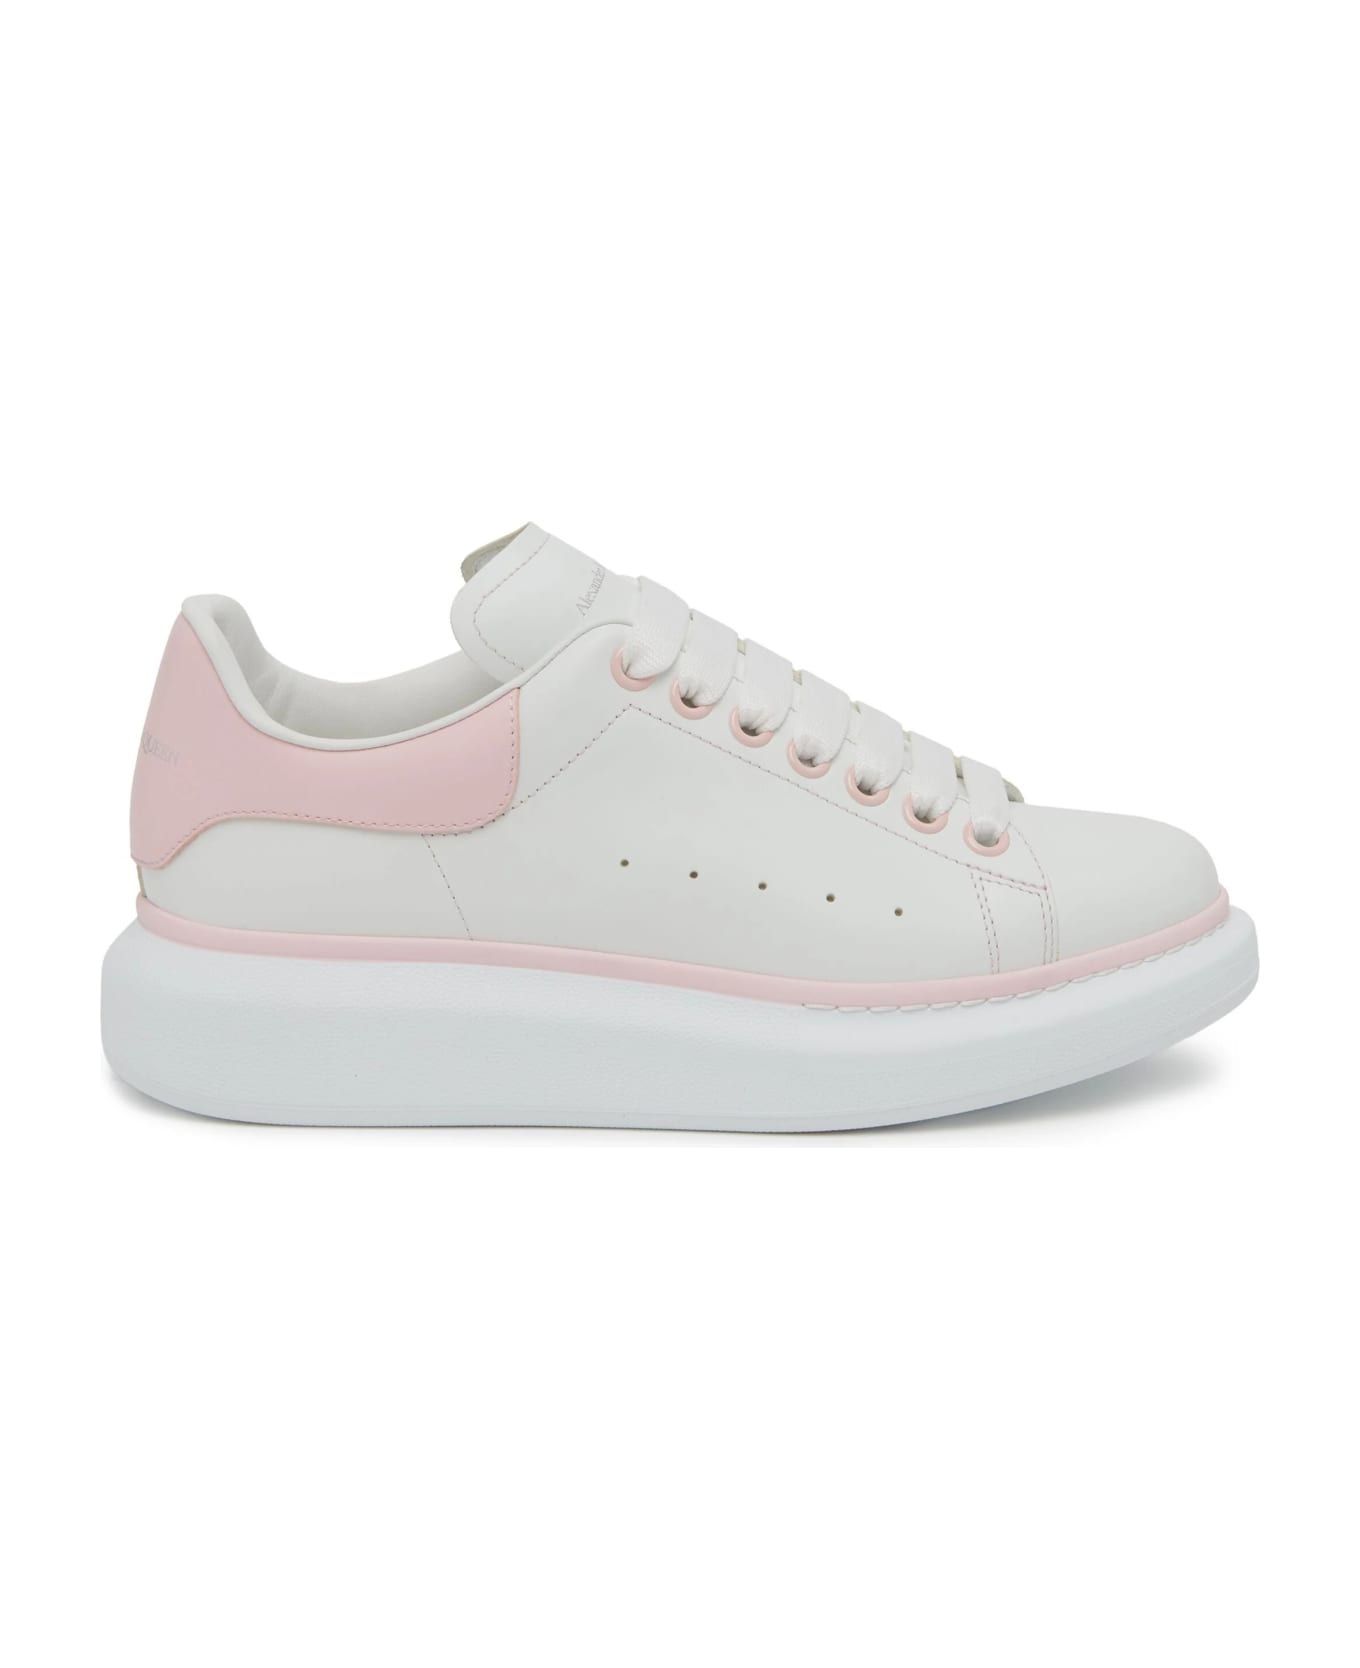 Alexander McQueen White Oversized Sneakers With Powder Pink Details - White スニーカー